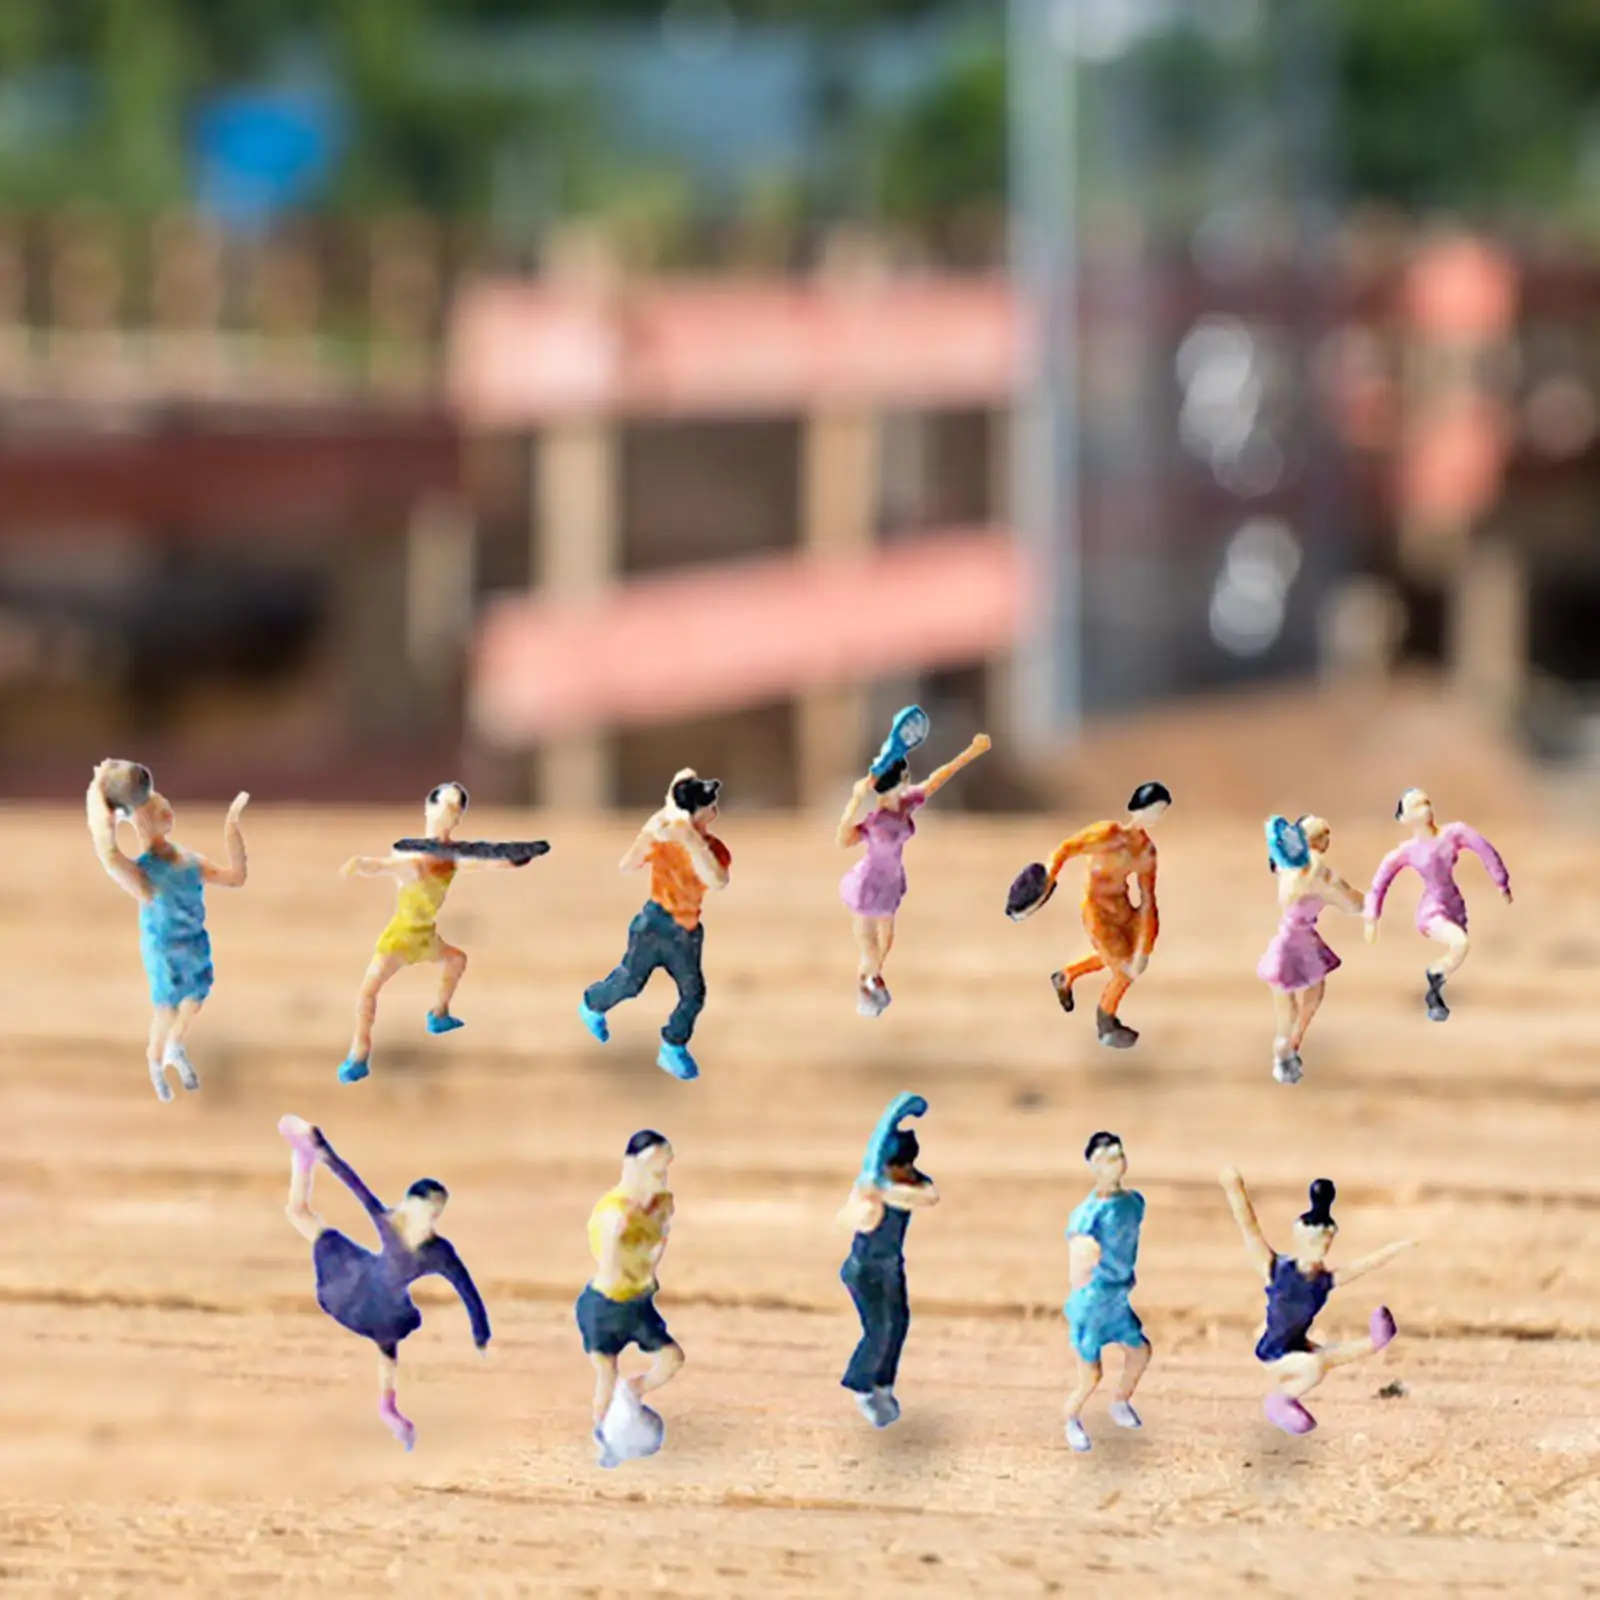 Miniature Sport Player Figurines for Dollhouse Decor Sand Table Layout Decoration DIY Projects Accessory Miniature Scenes Decor